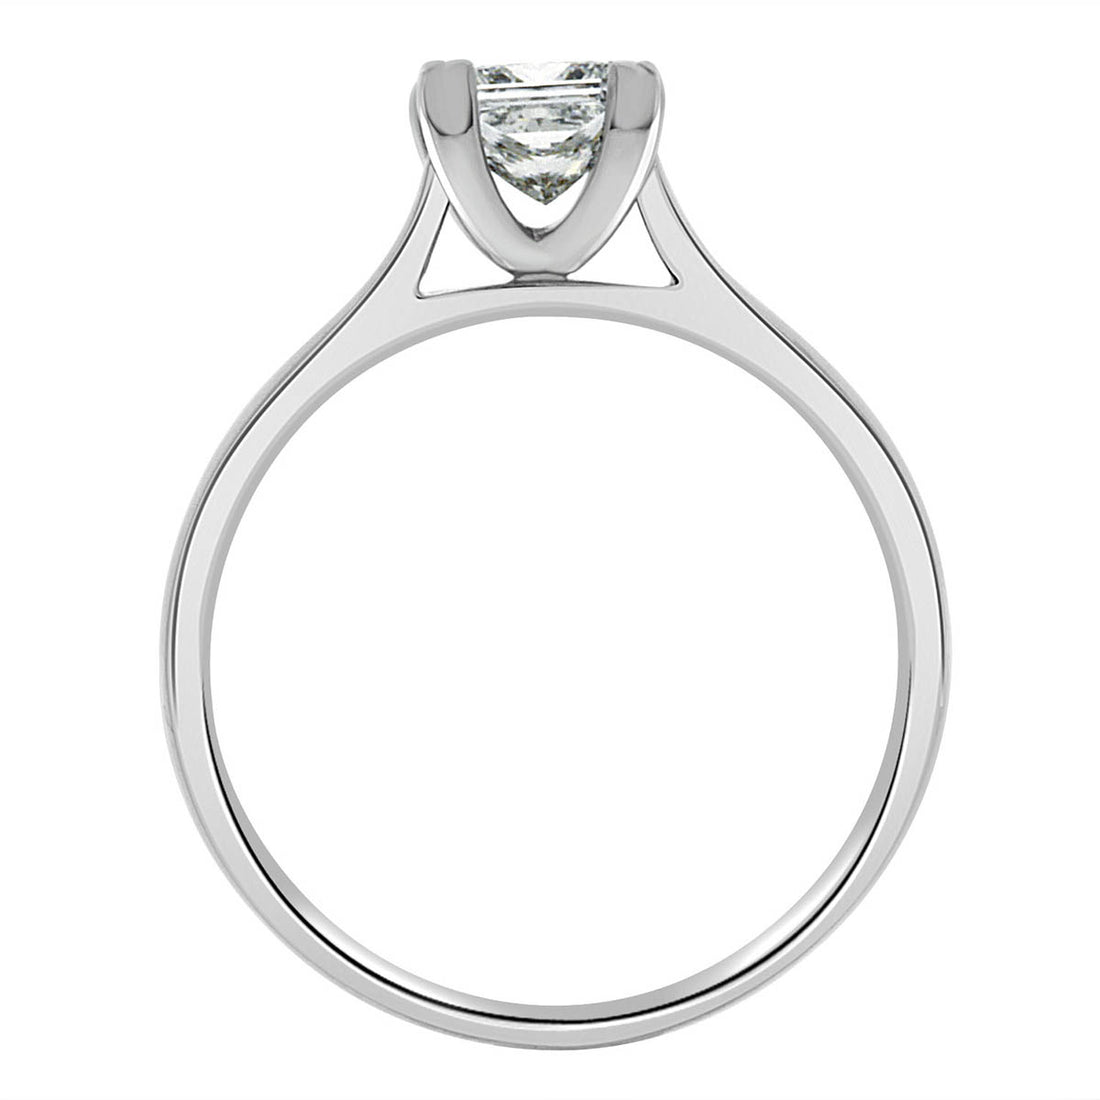 Princess Cut Solitaire  engagement ring in white gold standing upright